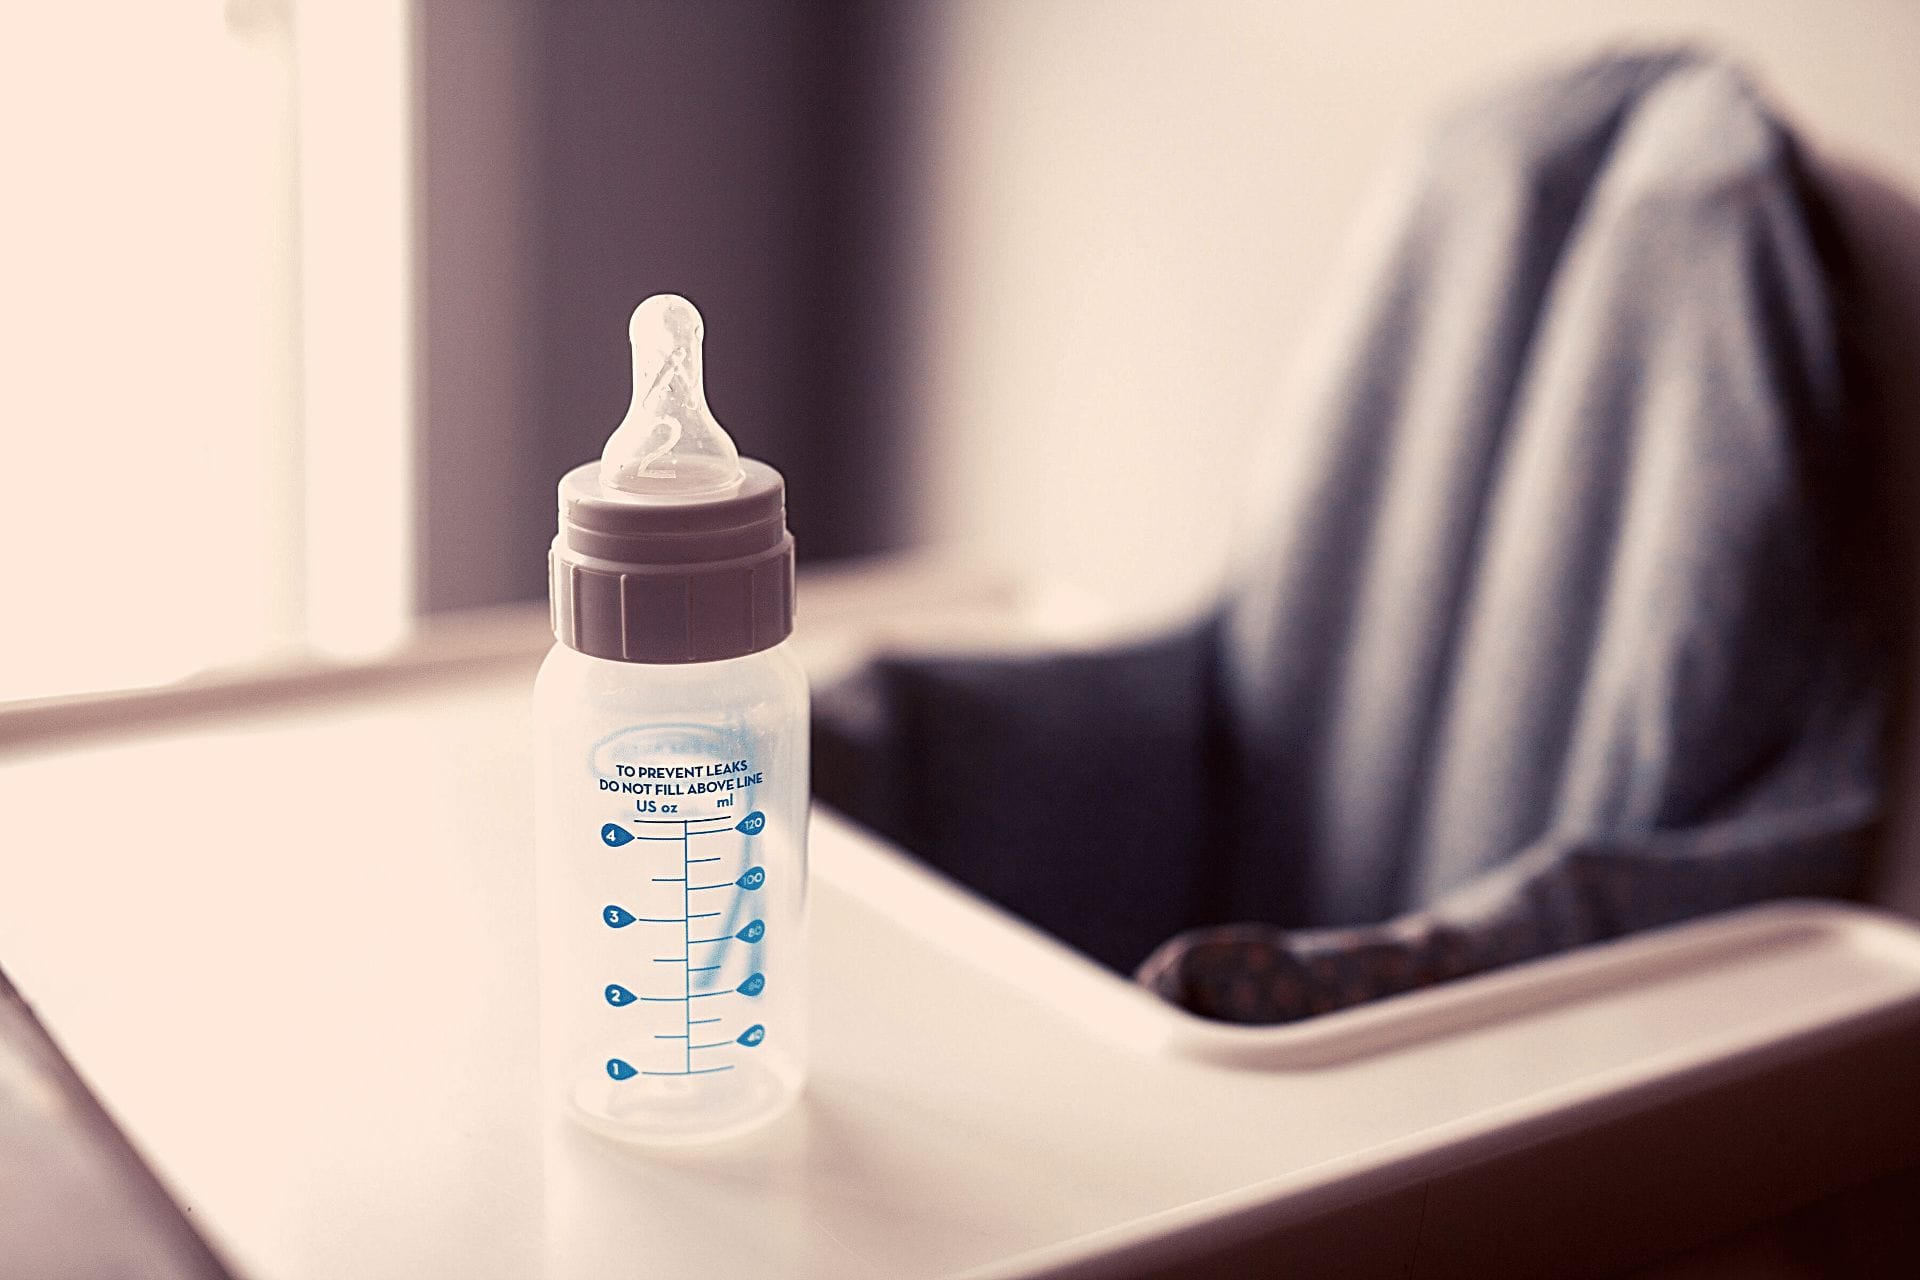 How to Get Your Toddler Off the Bottle